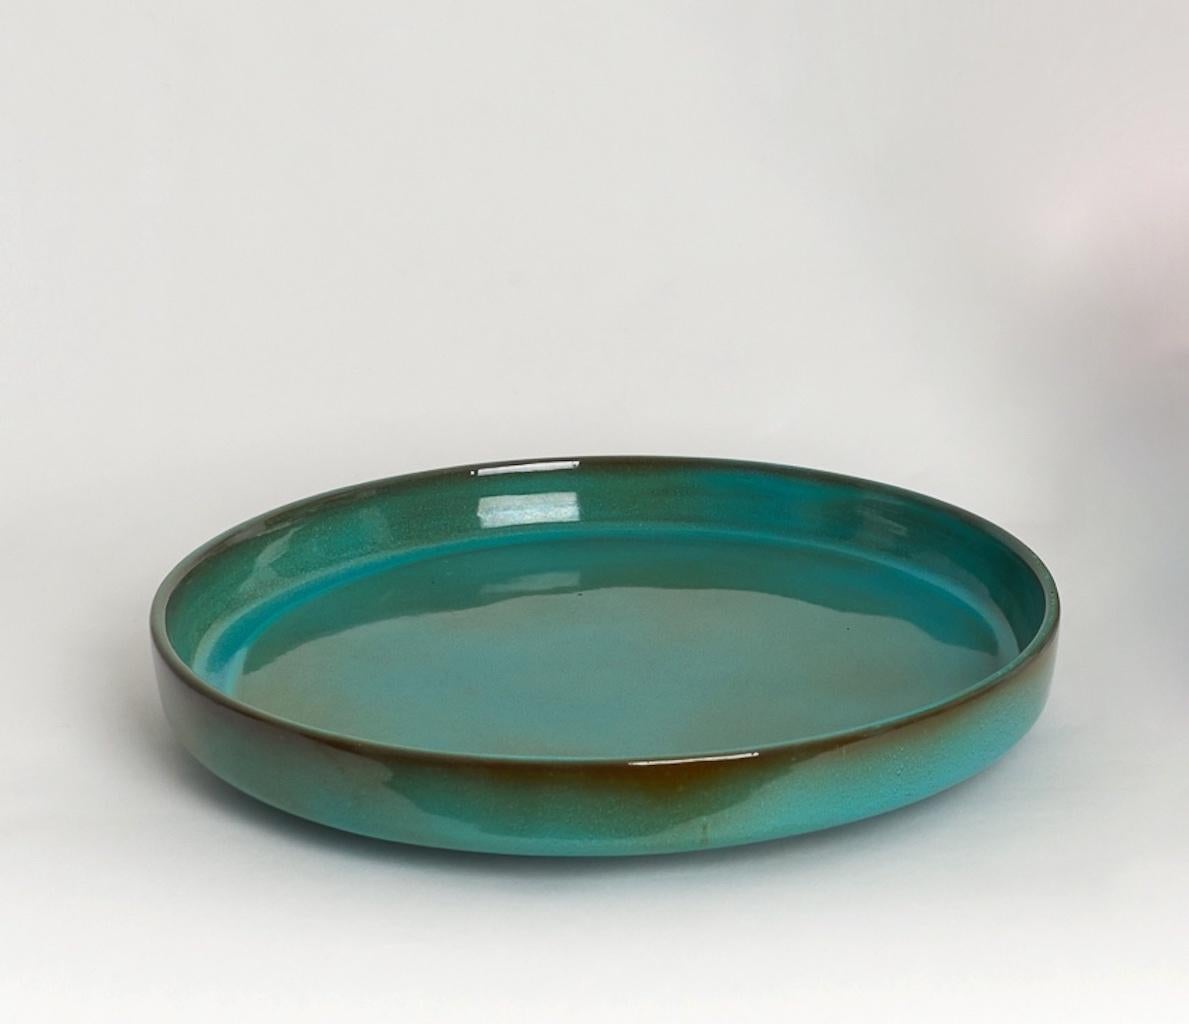 Shiny green dish or vide-poches by Jacques et Dani Ruelland, 1960s.
Signed on back
Measures: Diameter 29 cm.